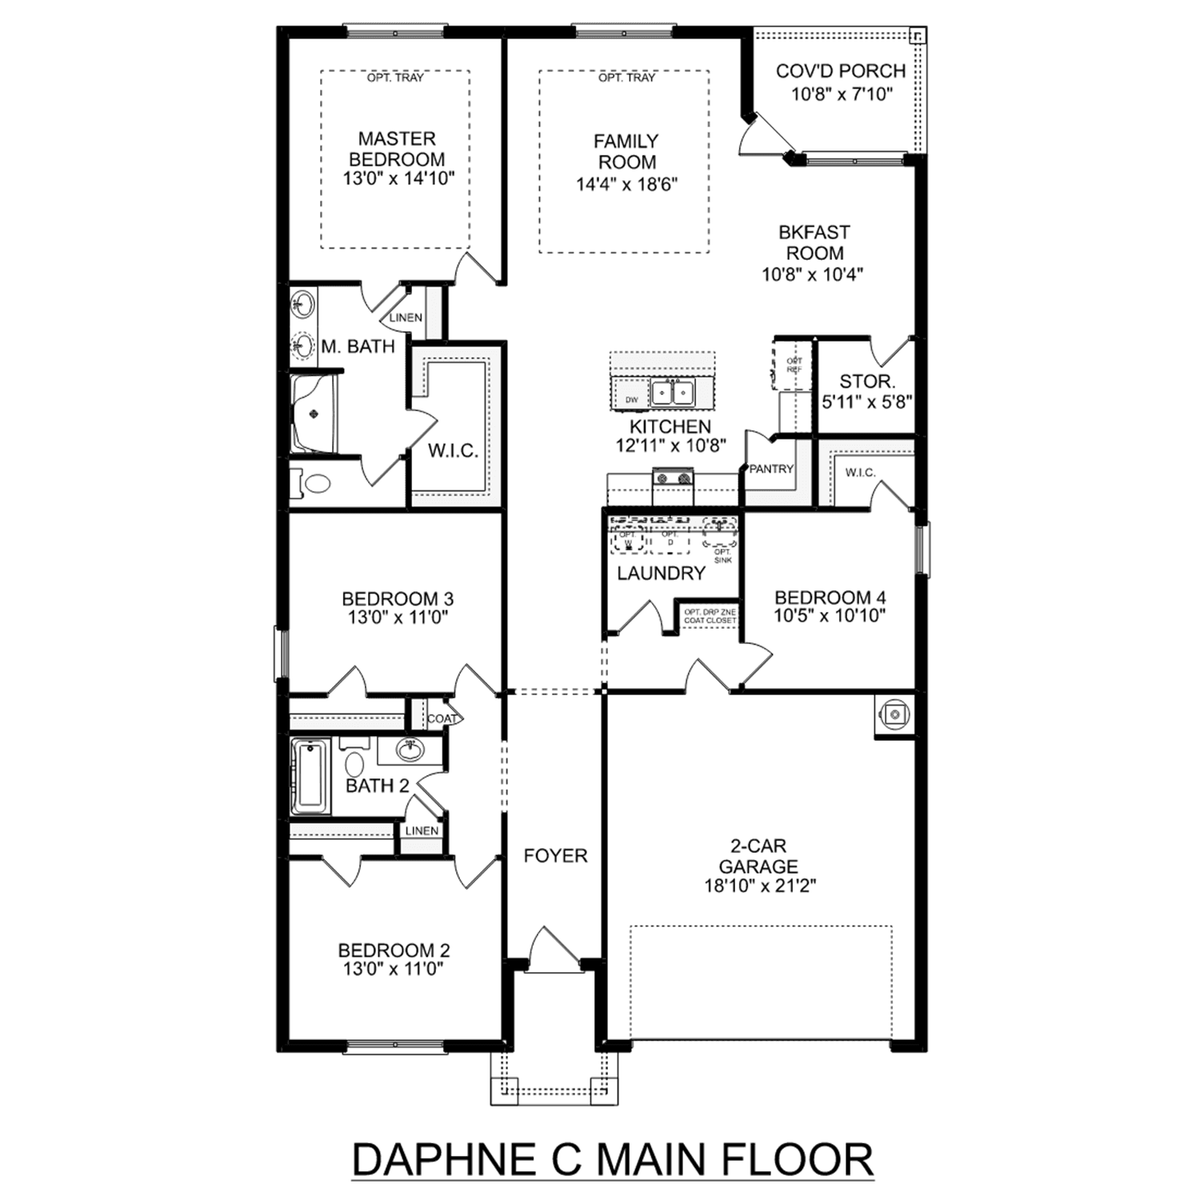 1 - The Daphne C floor plan layout for 6250 Pisgah Drive in Davidson Homes' Spragins Cove community.